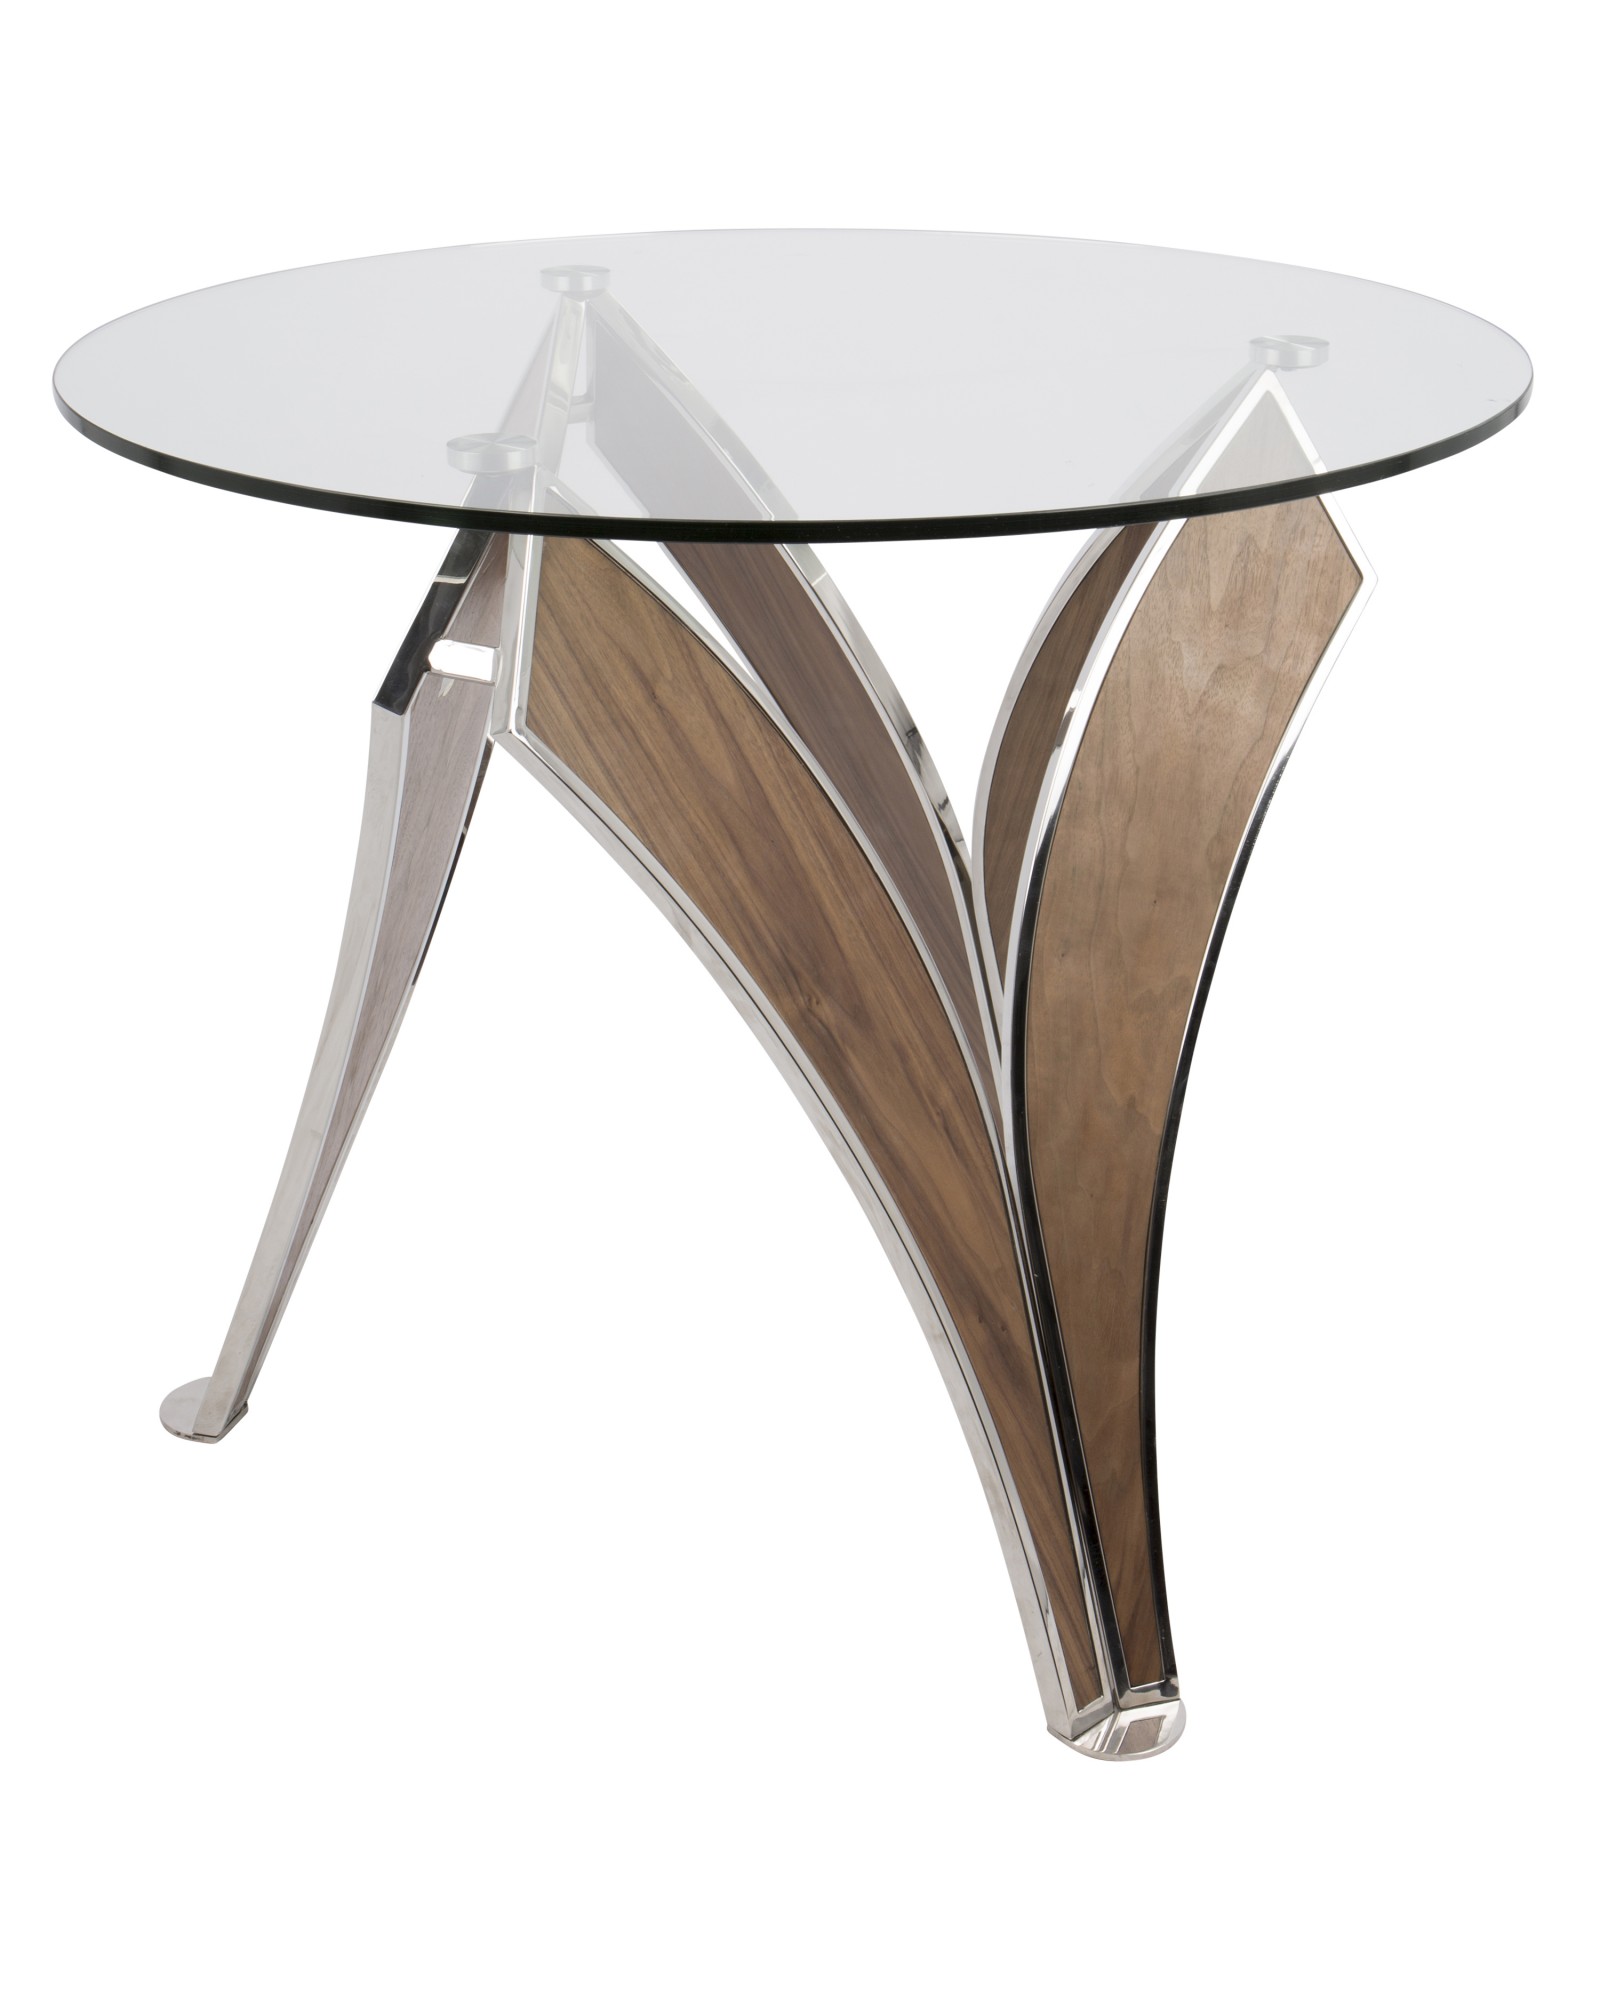 Prestige Contemporary Dining Table in Polished Stainless Steel and Walnut